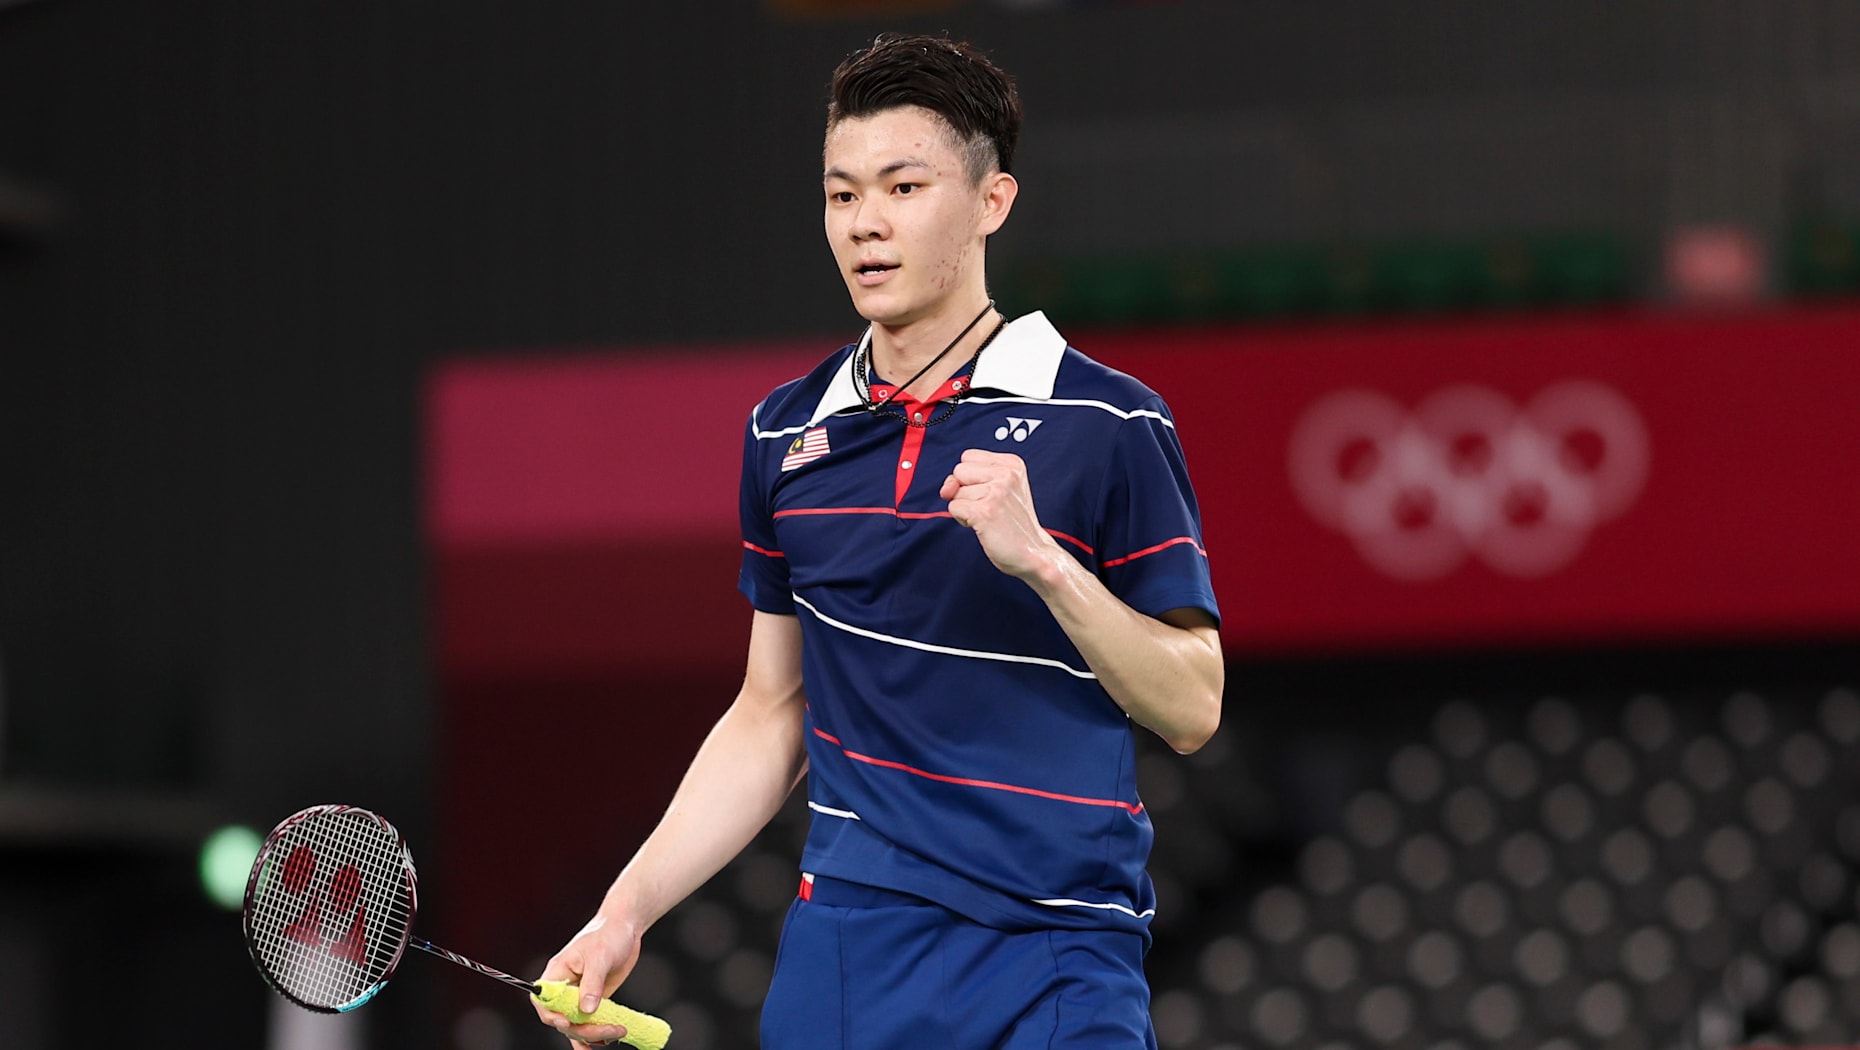 Is Lee Zii Jia the next badminton World No. 1?